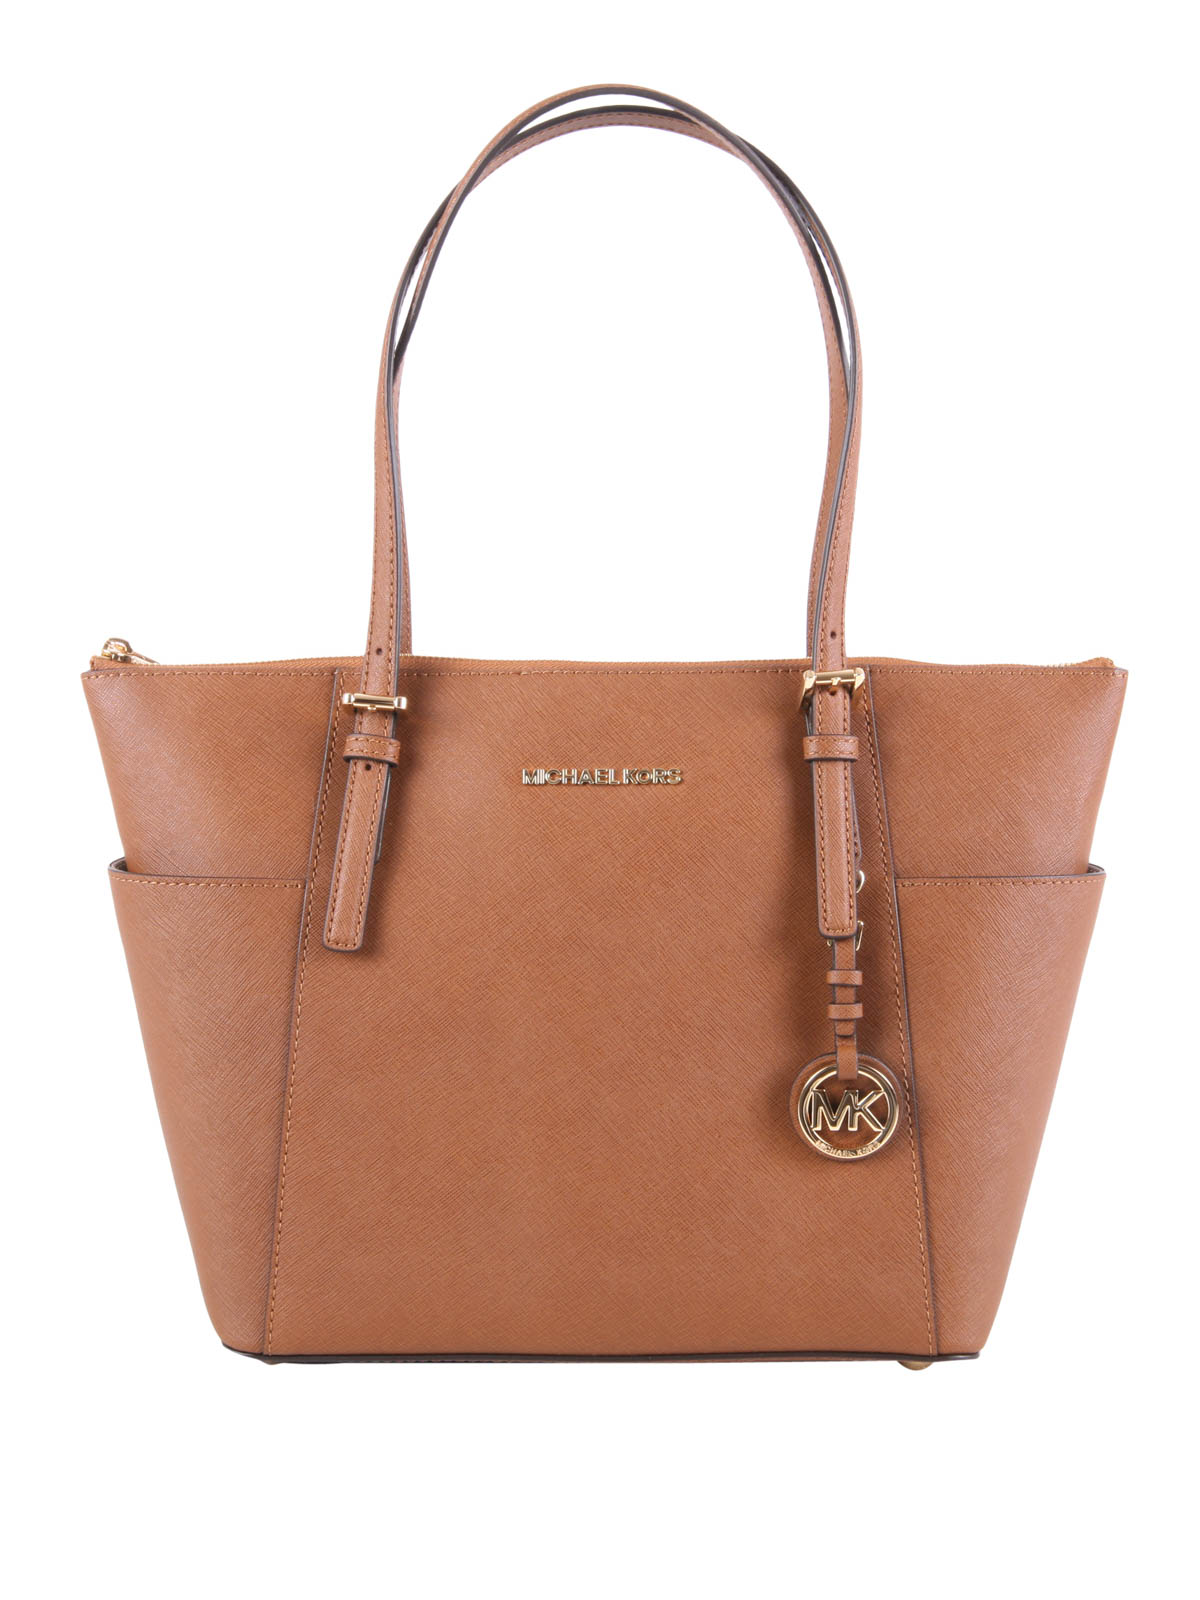 Michael Kors Jet Set Large Saffiano Leather Top-Zip Tote Bag in